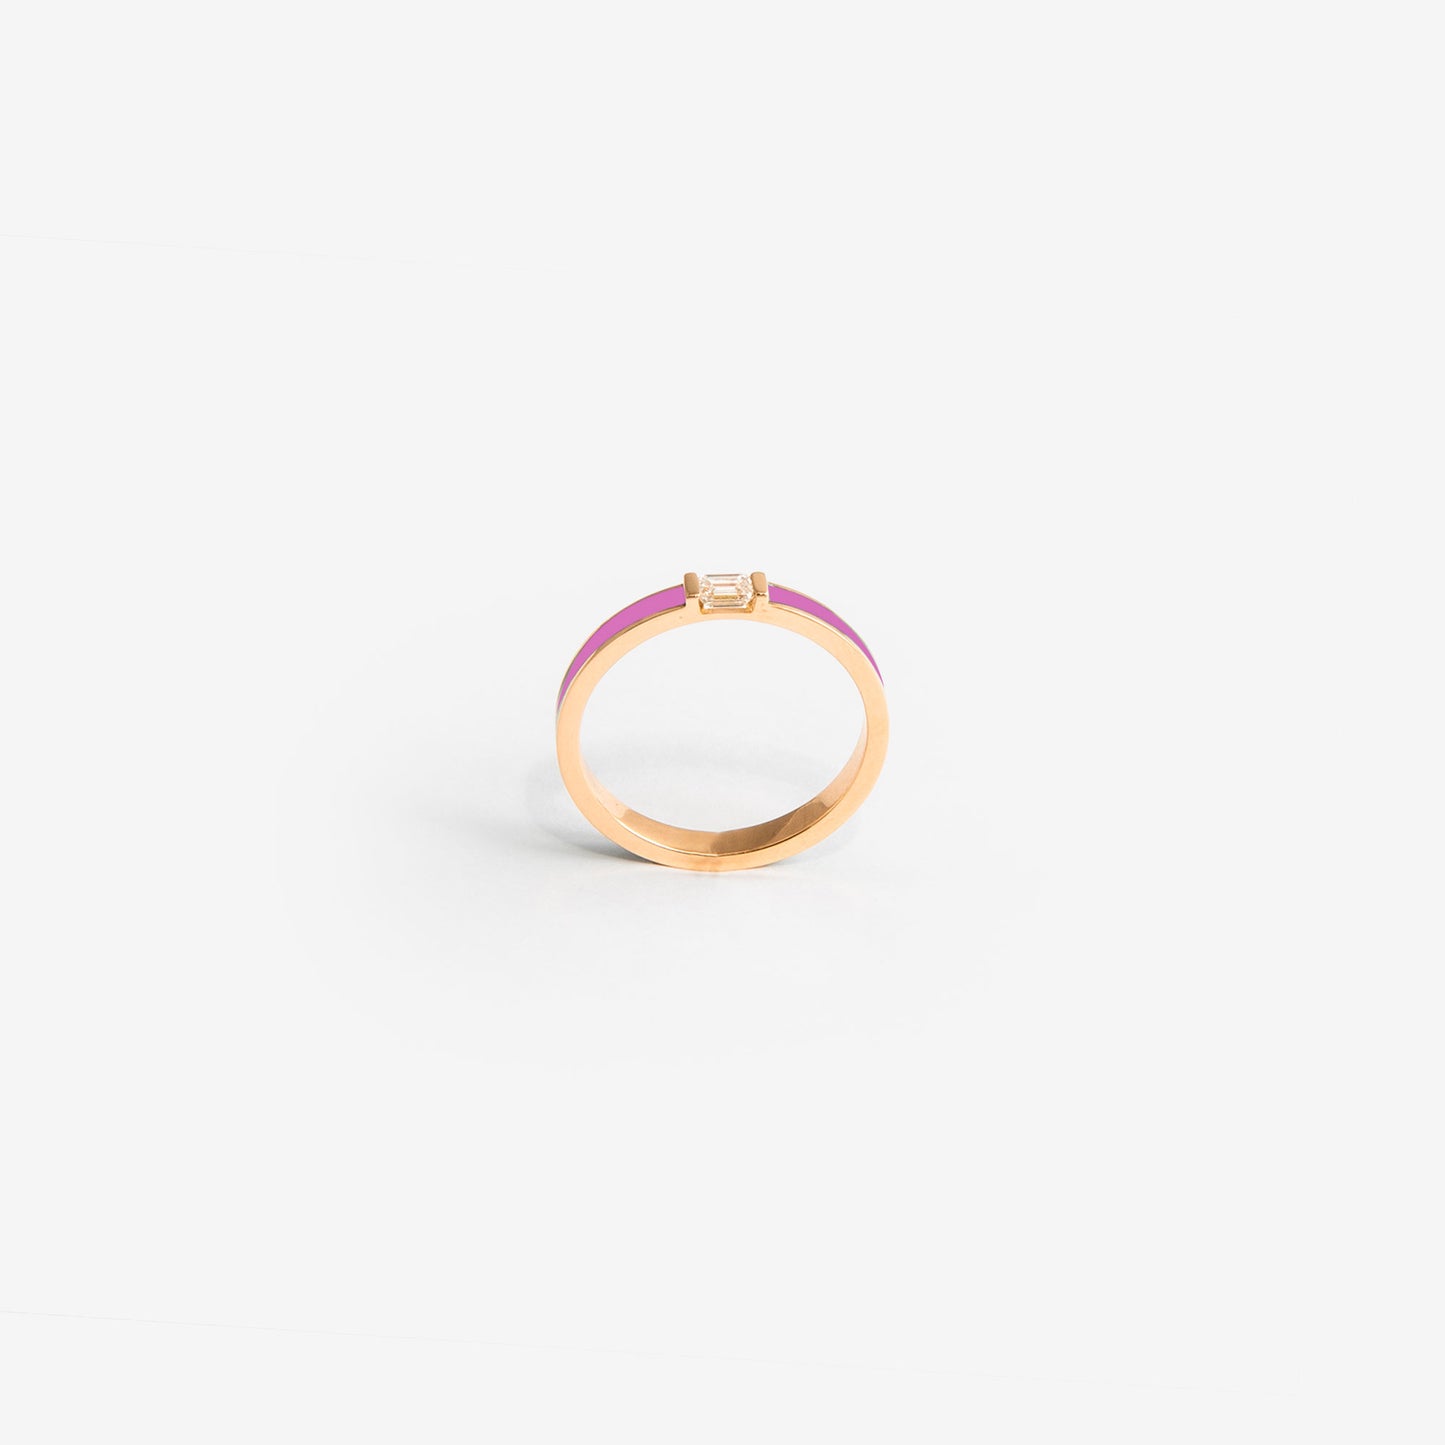 Rose gold band ring  with light pink enamel and diamond